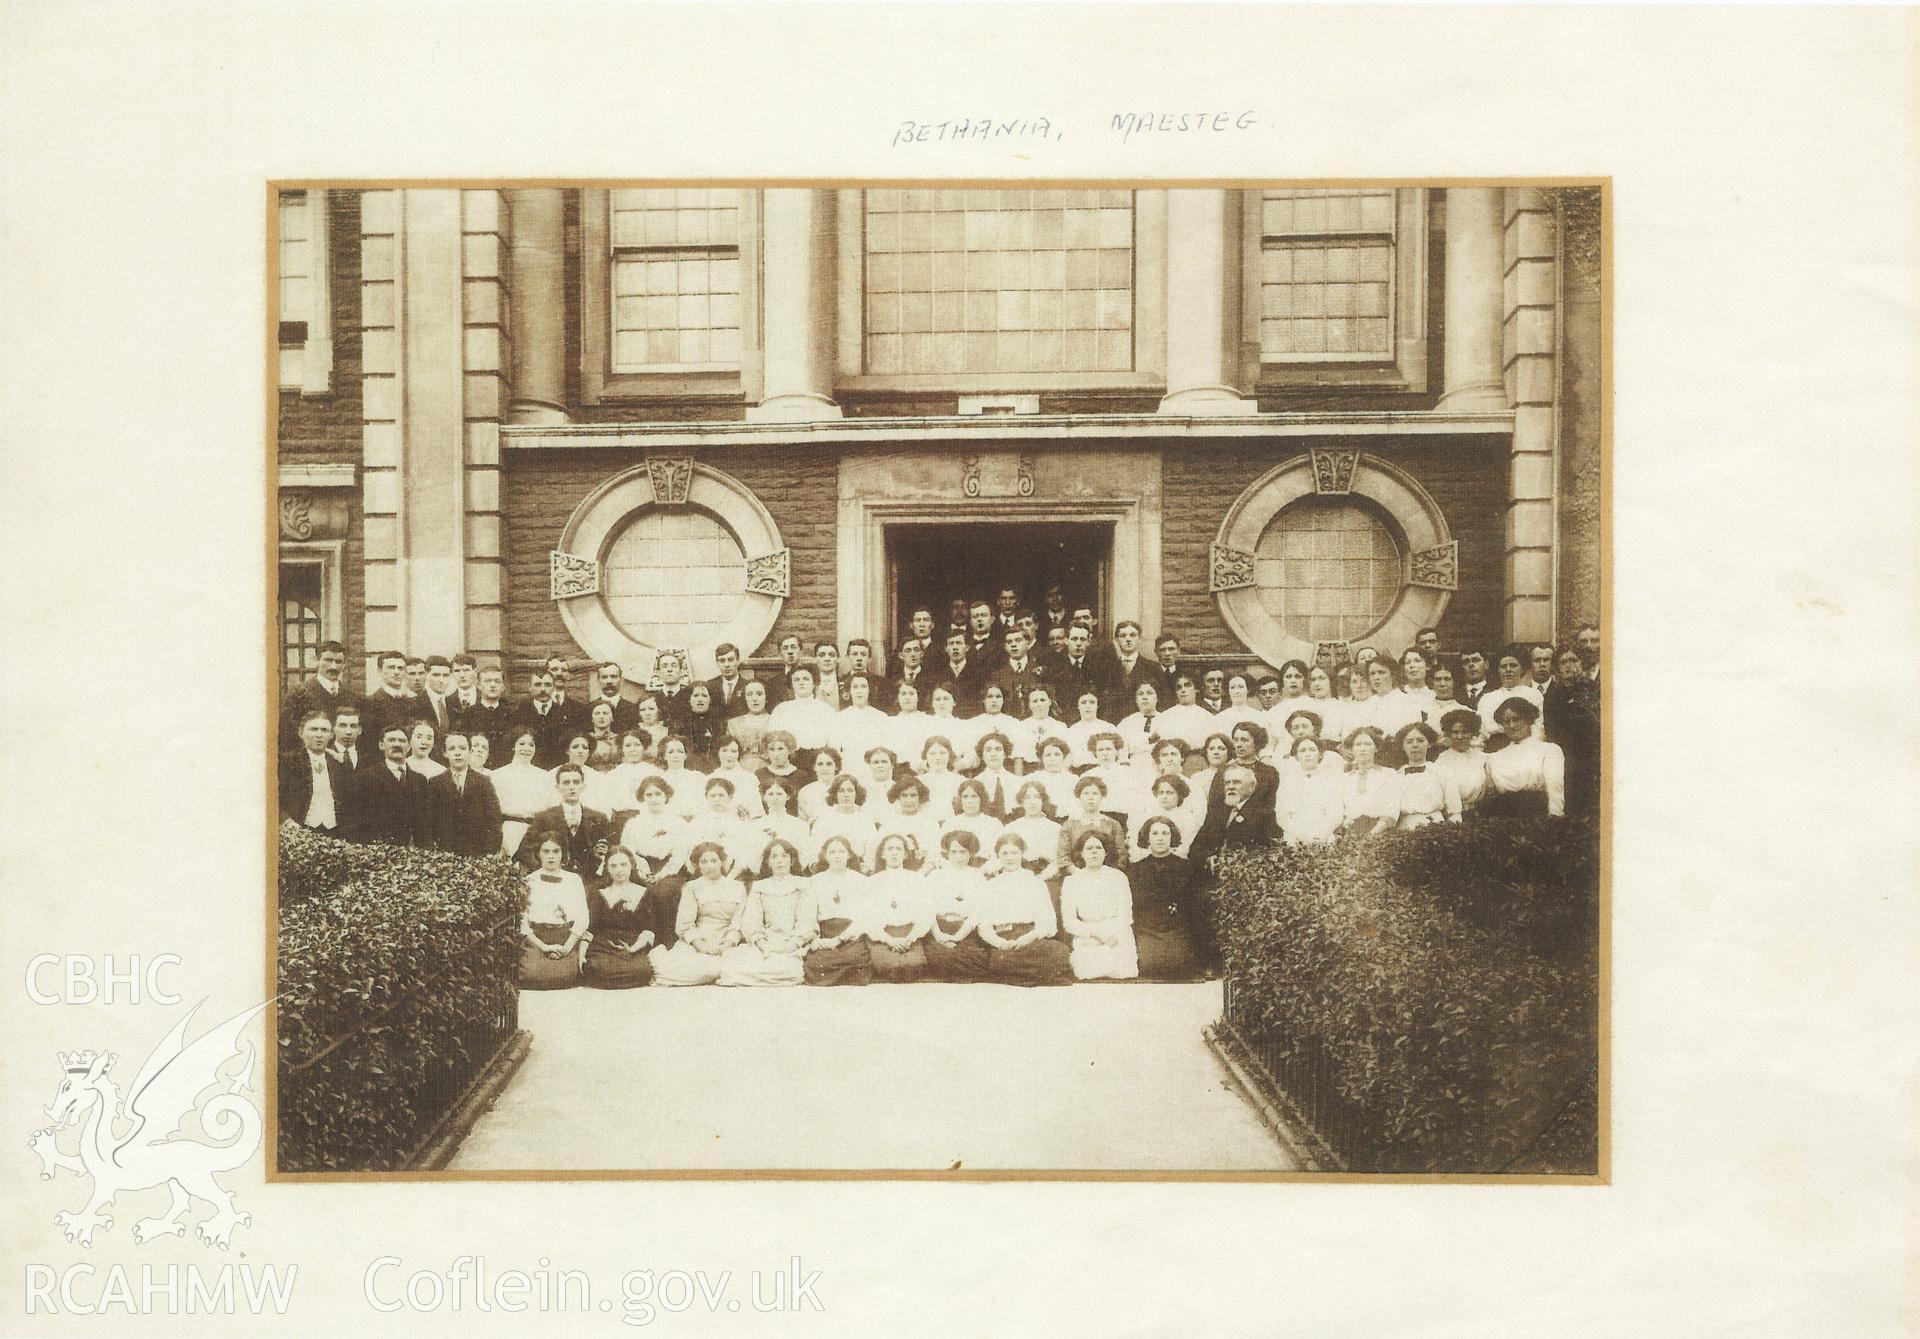 Black and white photograph of the choir outside the front facade of the chapel, 1930. Donated to the RCAHMW by Cyril Philips as part of the Digital Dissent Project.